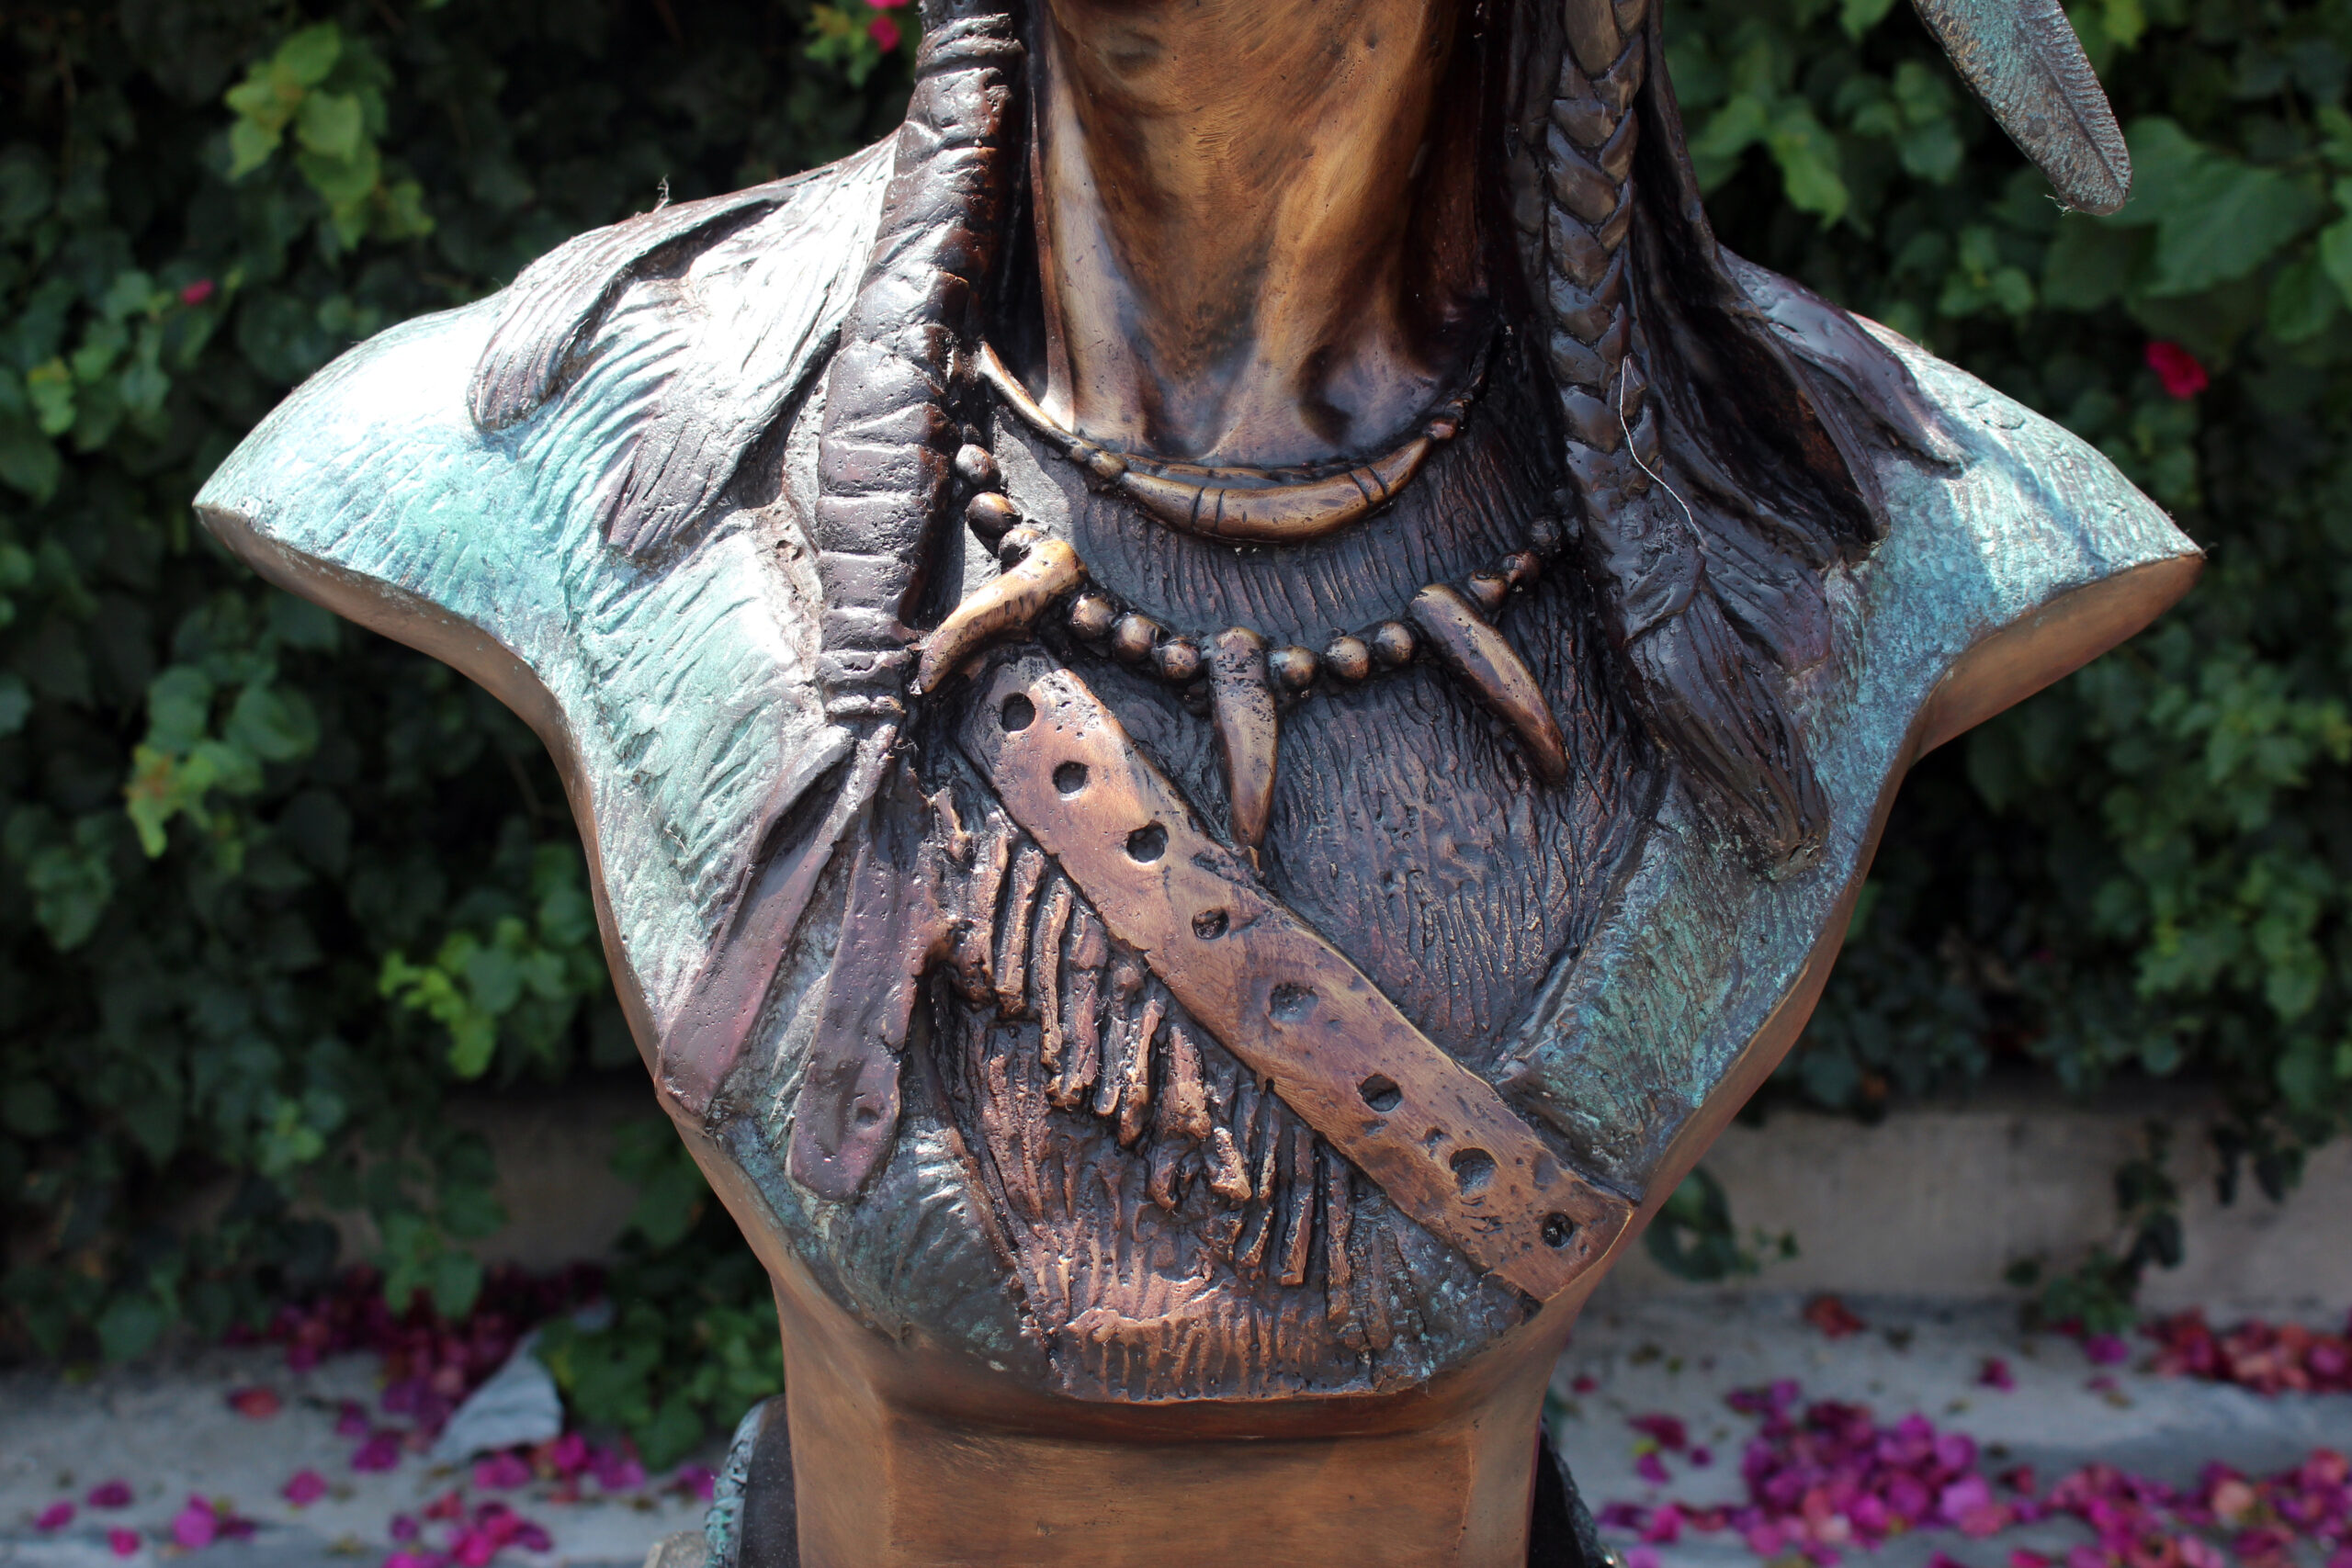 bronze statue of a native american bust